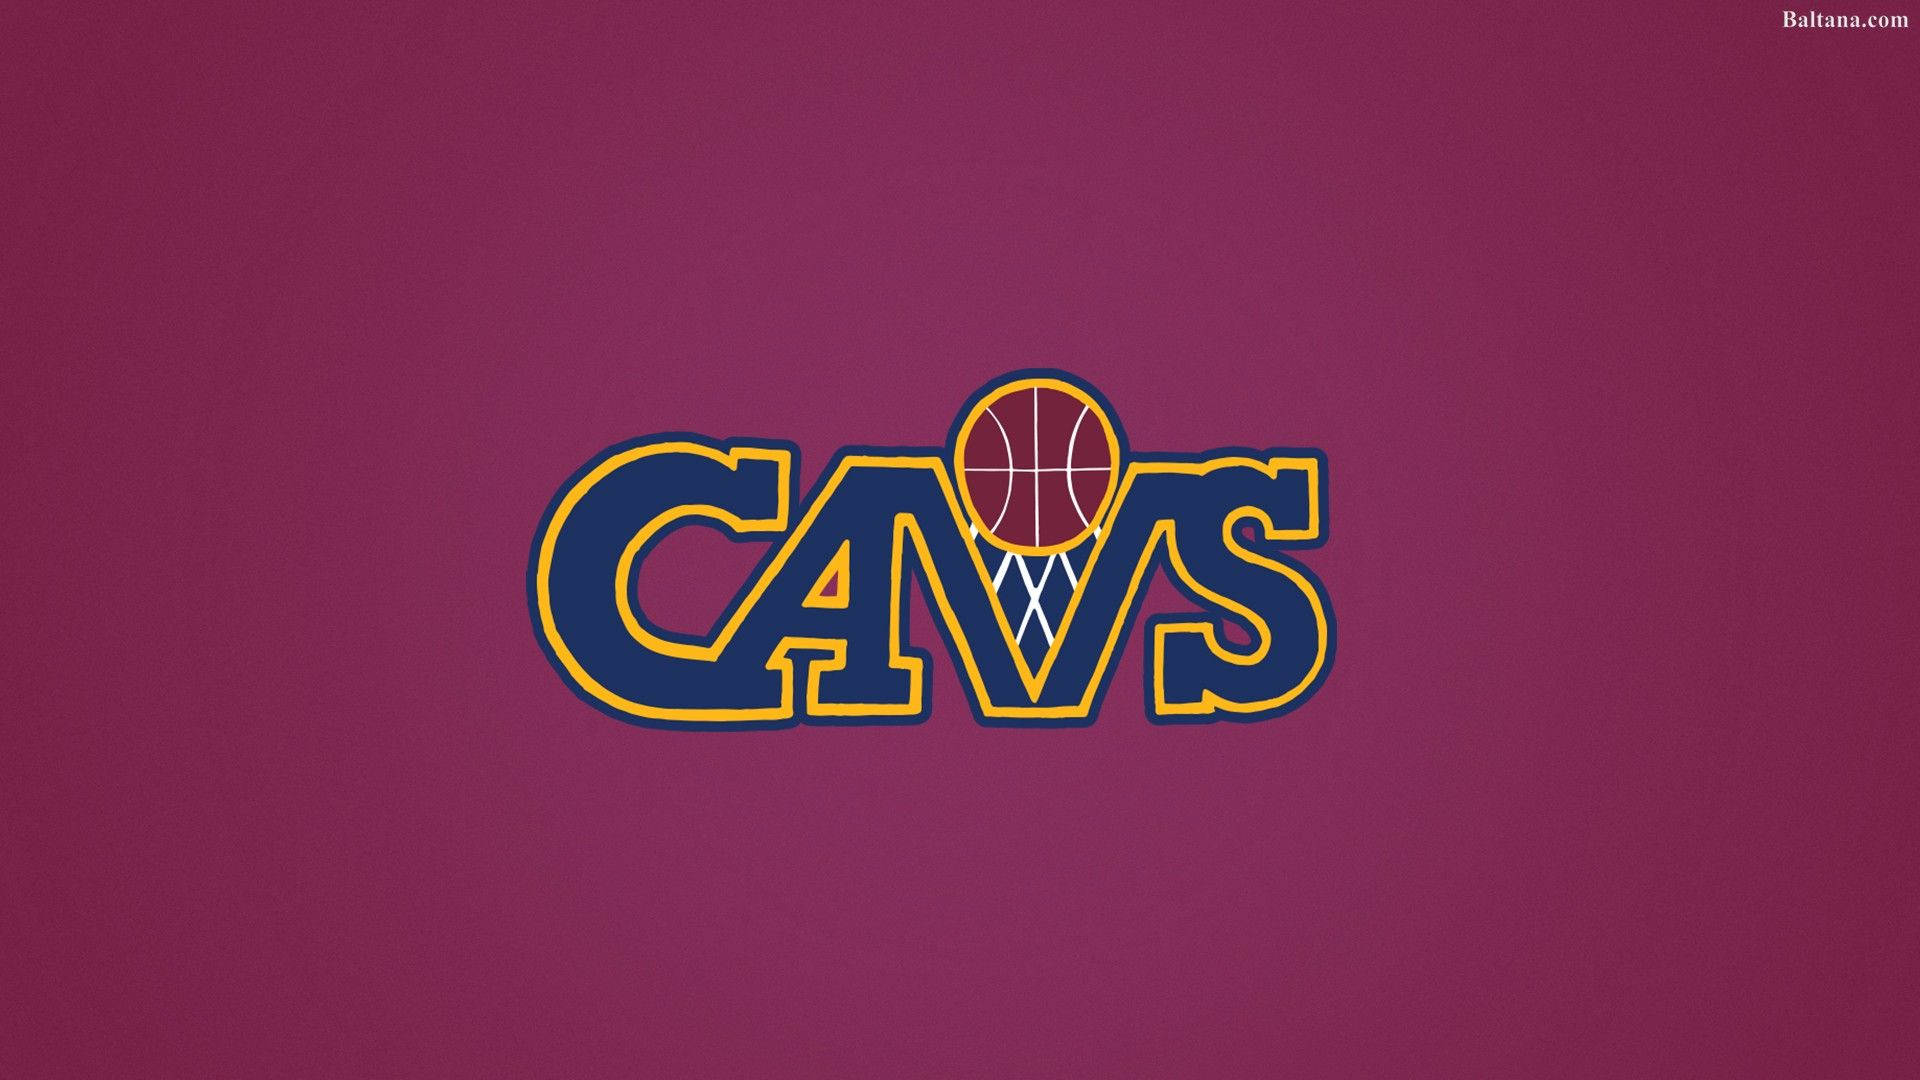 Cleveland Cavaliers Ring Logo Wallpaper